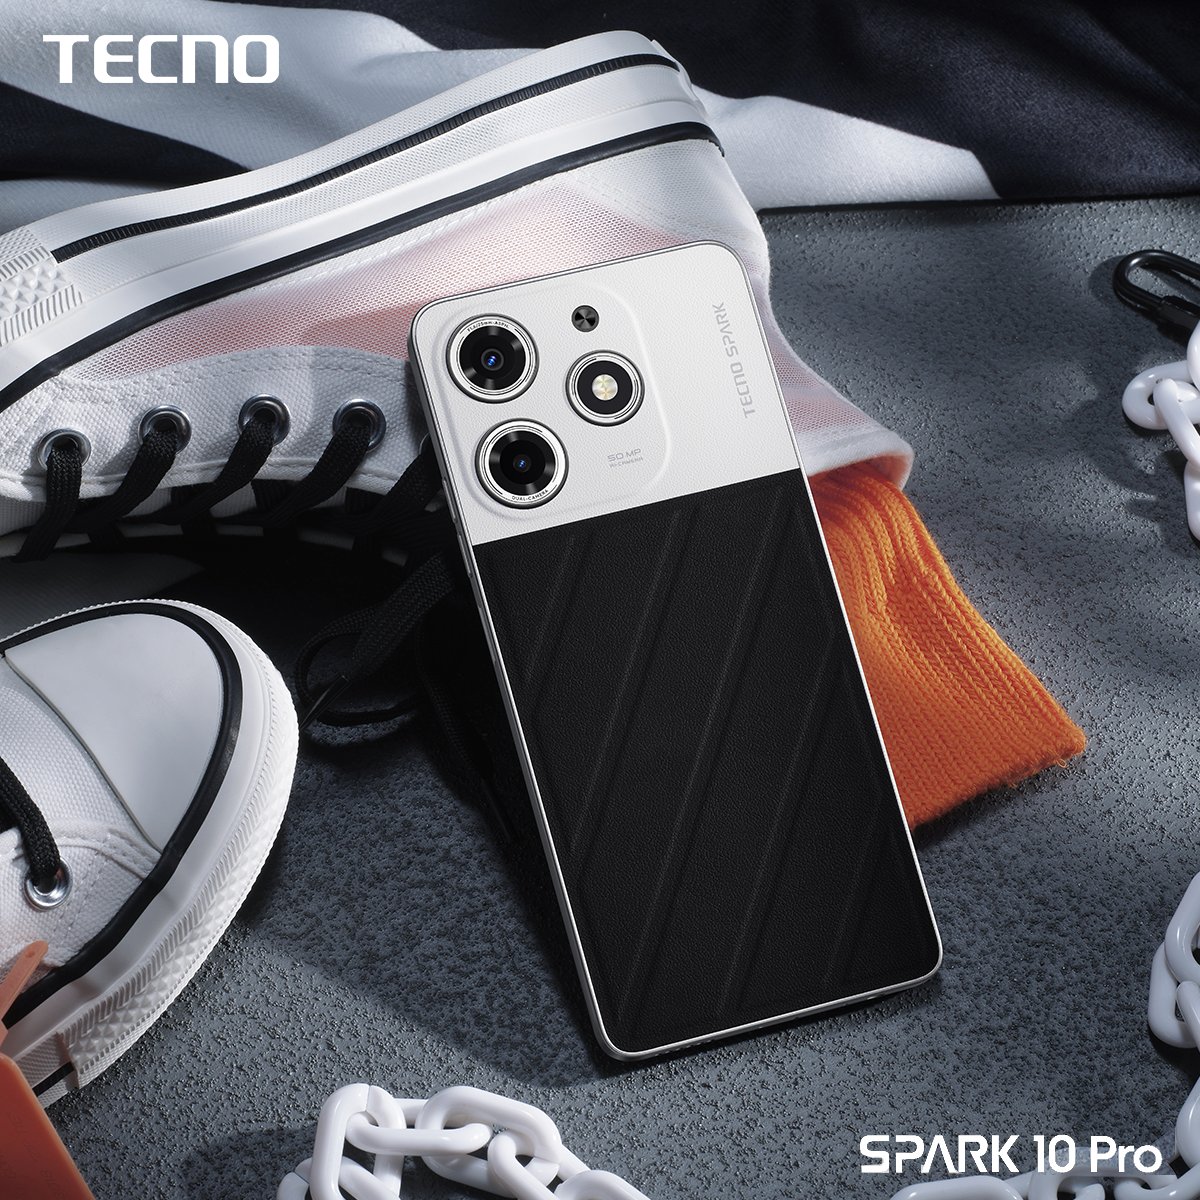 Black meets white in a revolutionary patchwork sight. 📷📷
This is the SPARK 10 Pro Magic Skin back design.
Double tap if you loving it. 📷
#SPARK10Series
#GlowingSelfie